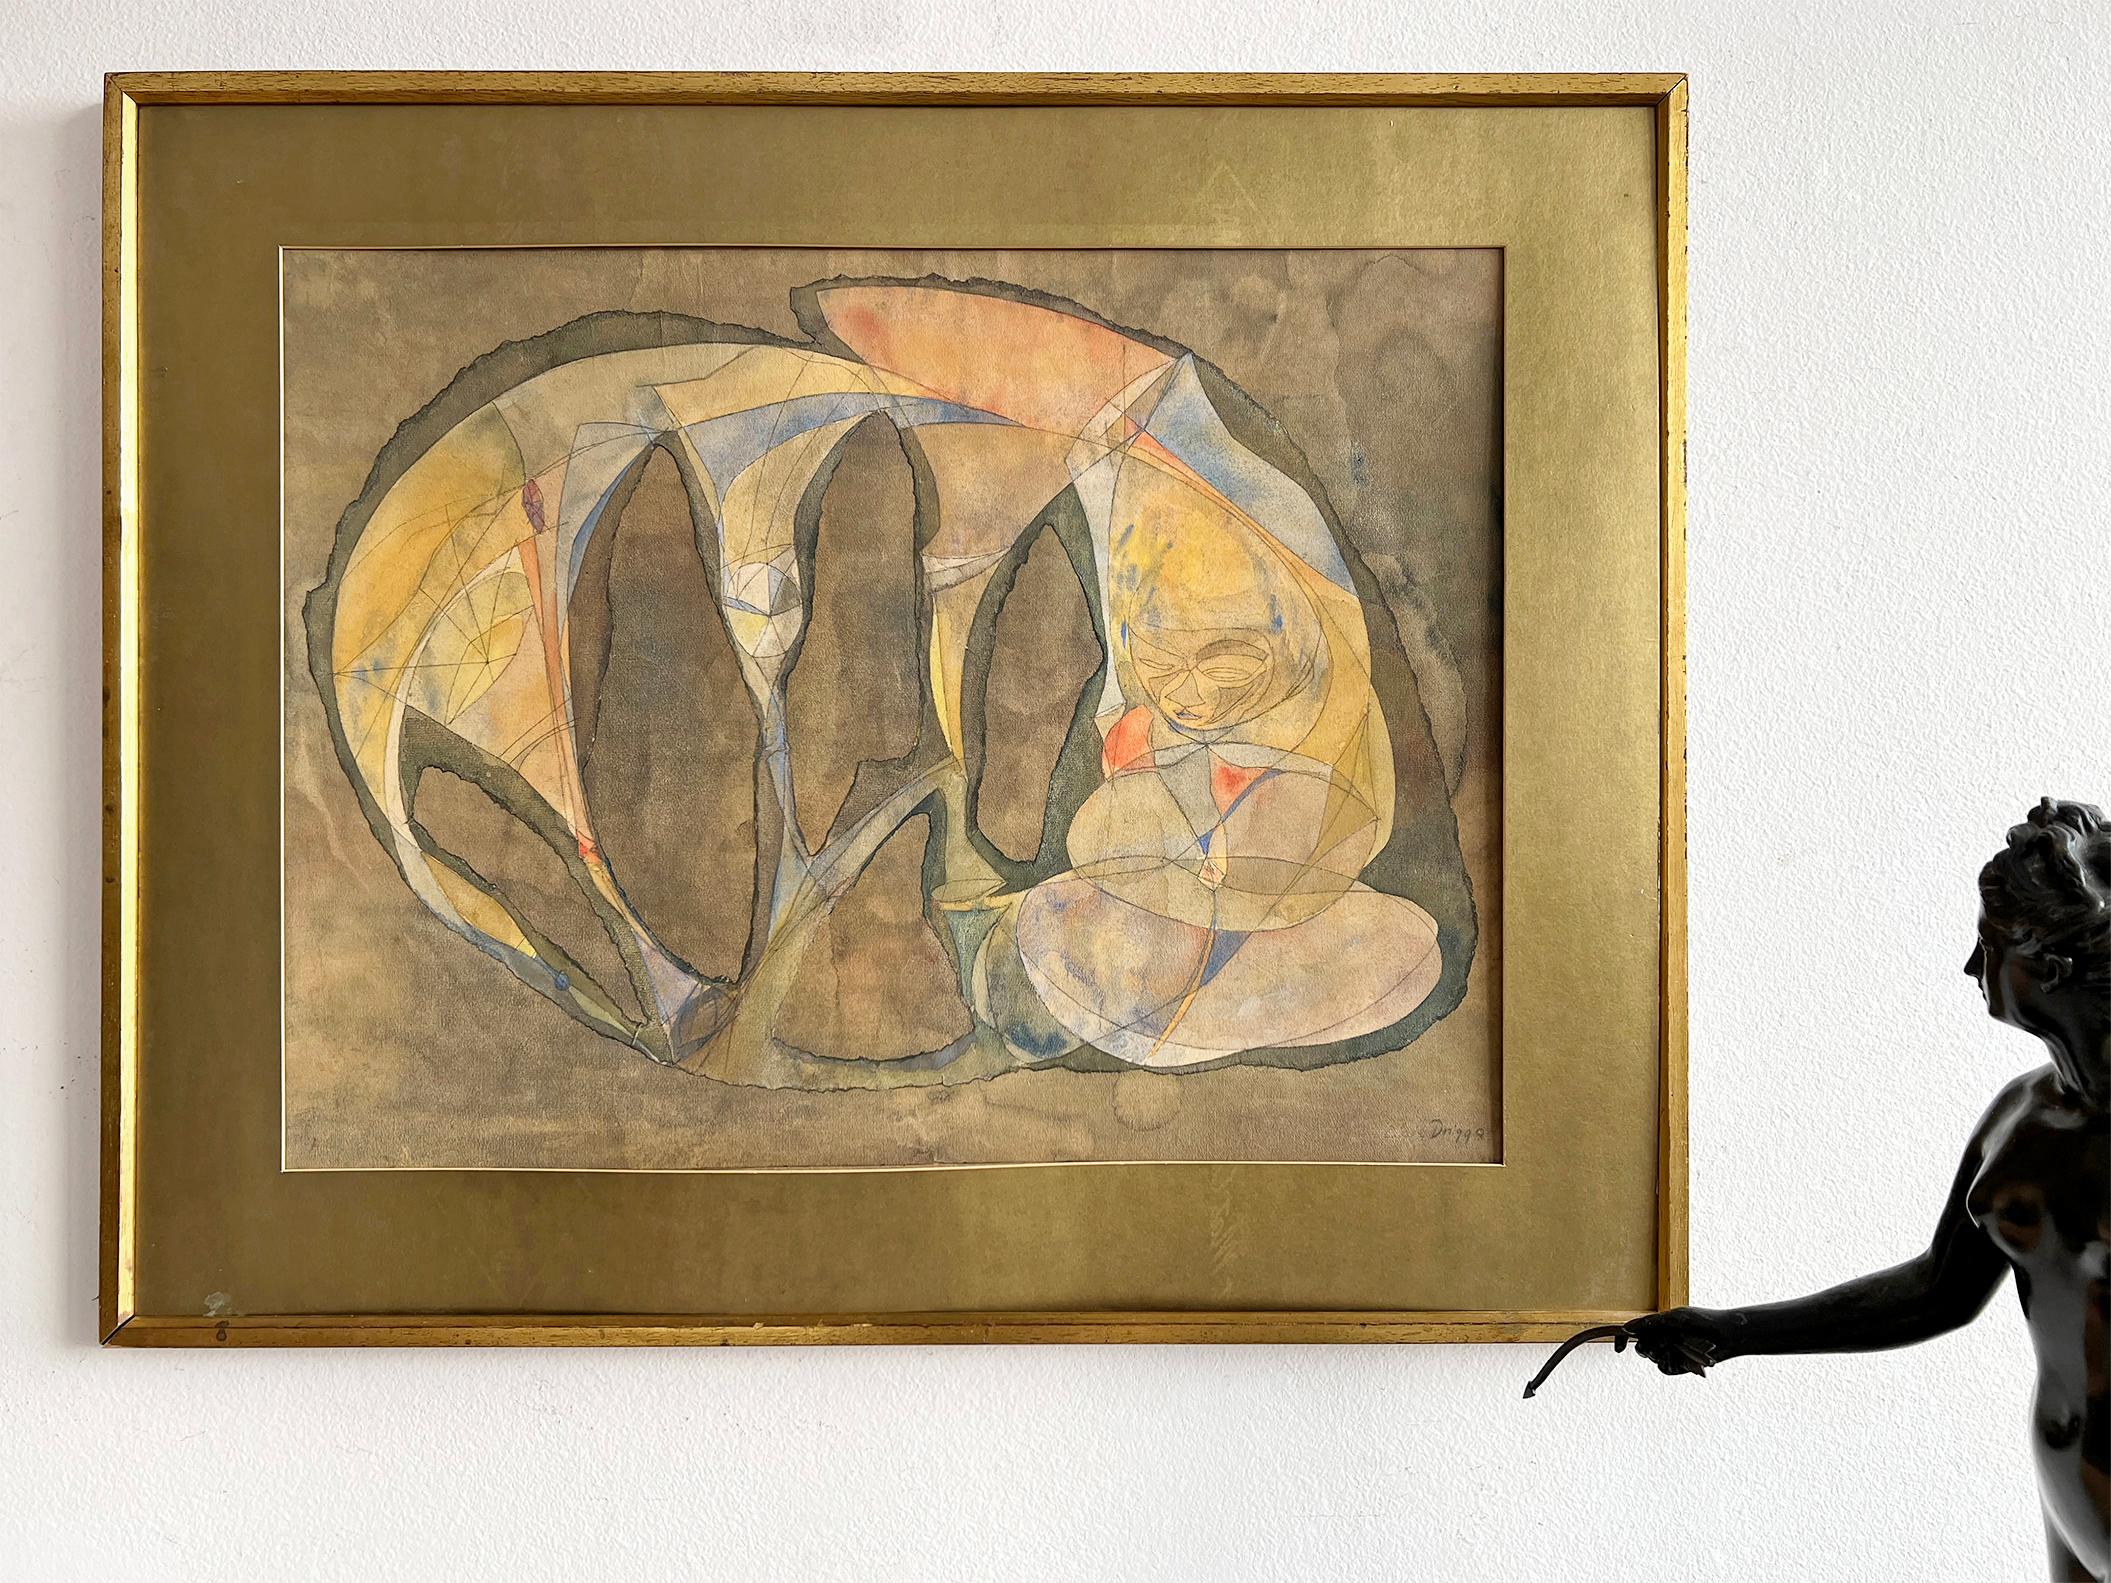 Pioneering female abstract artist Elsie Driggs paints stylized abstract organic forms in a warm palette of orange browns and tope.  She merges abstraction with some figuration. A  structured face composed of lines and tone emerges from an orange